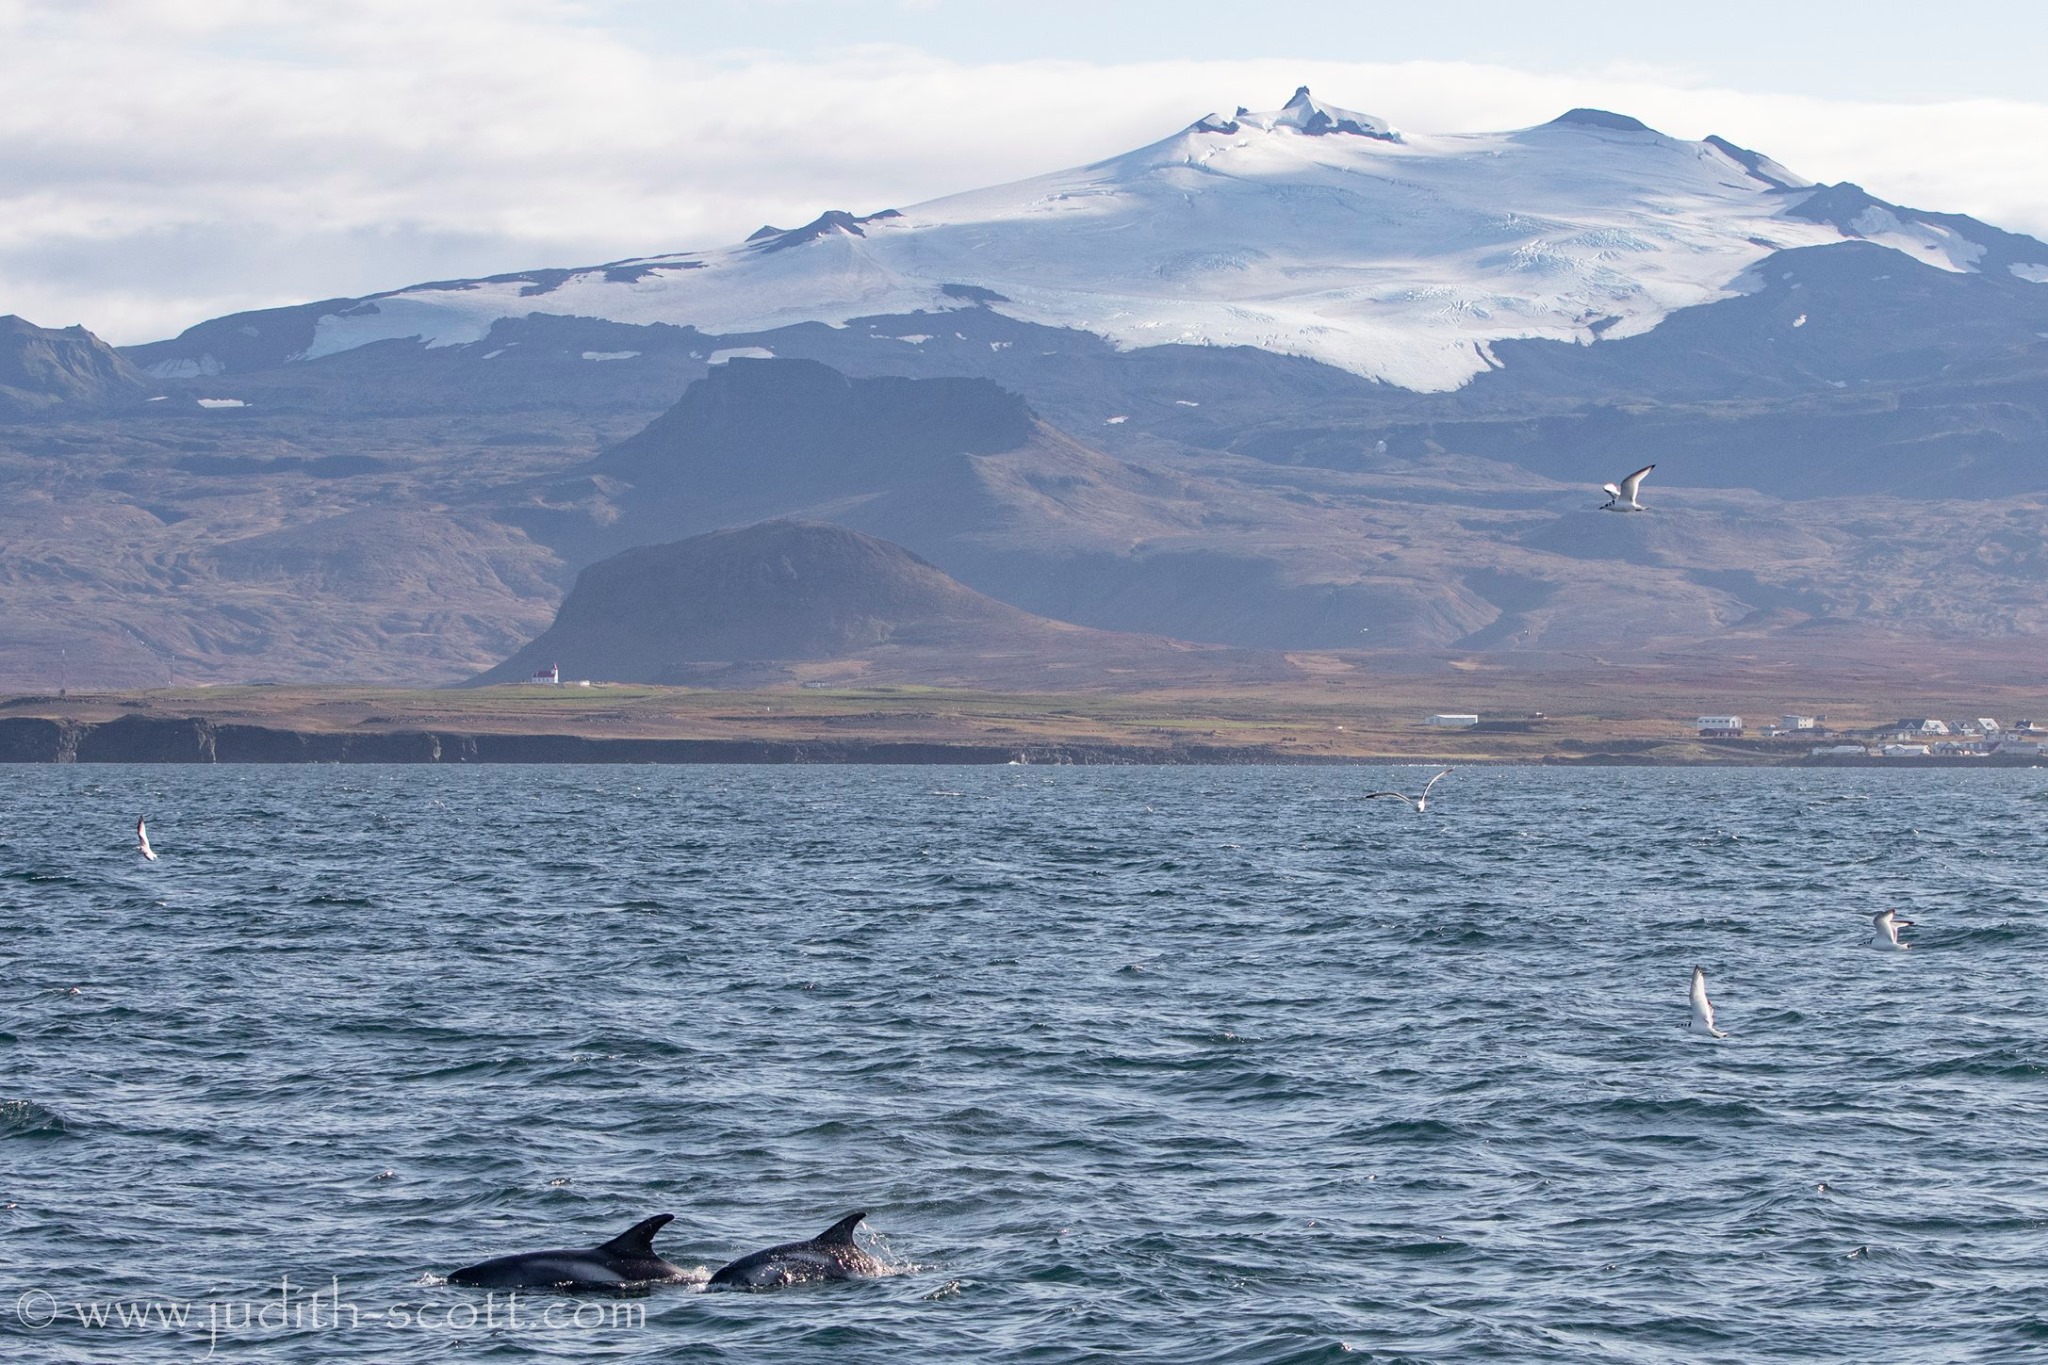 Whale Watching in Snaefellsnes, Best Place for Whale Watching in Iceland